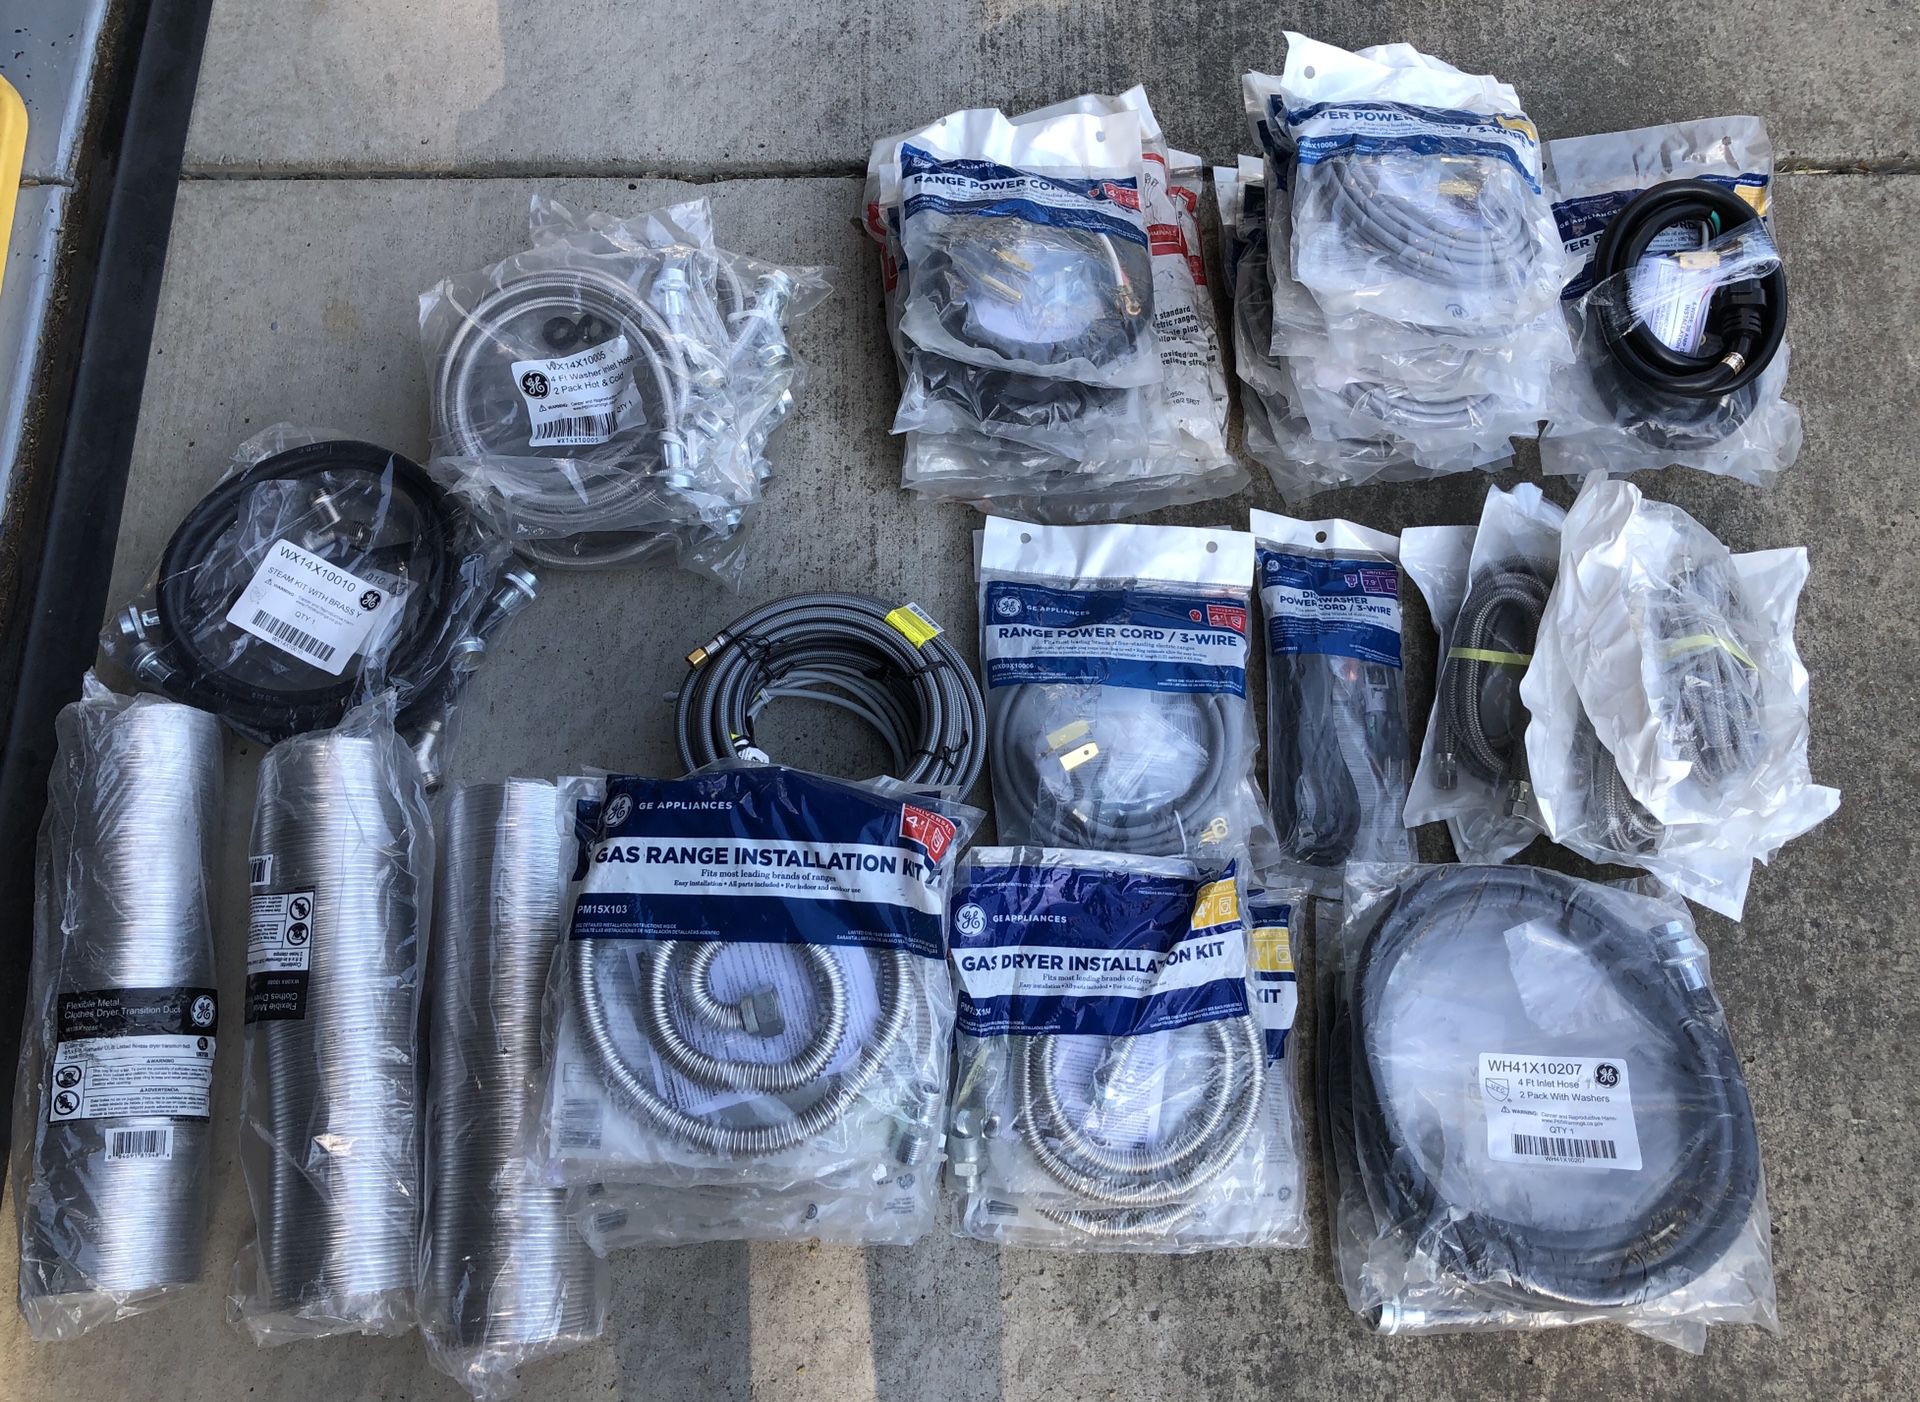 Brand New Appliance Cords, Connections, Supply Lines, Gas Lines, Vents